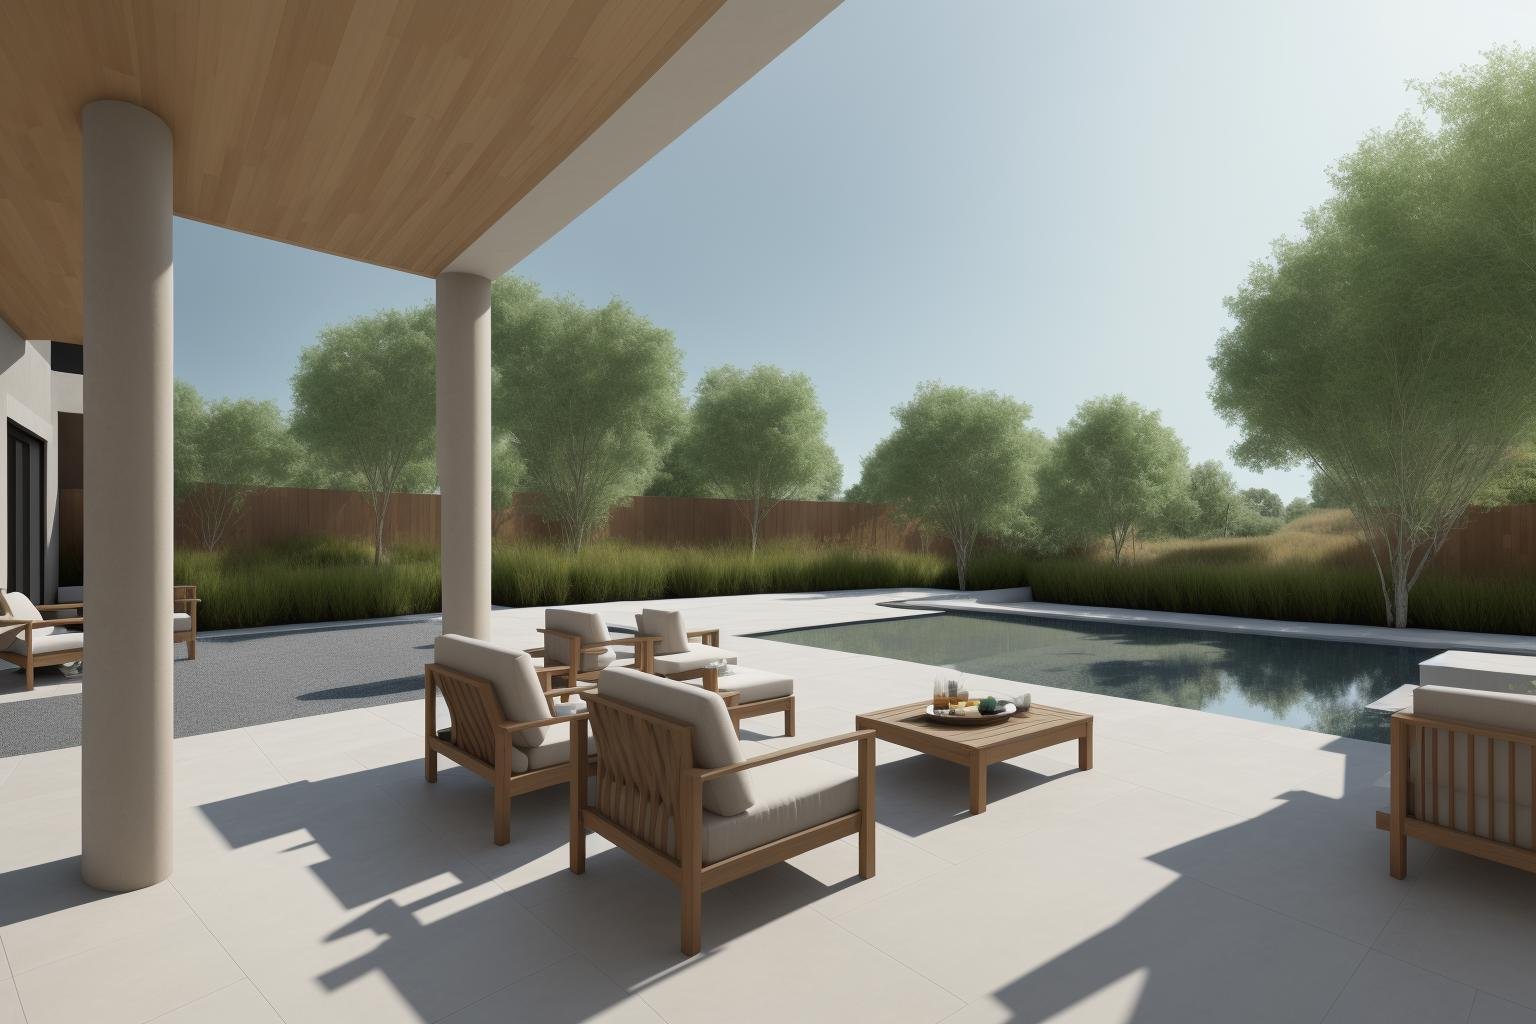 An expansive outdoor living space takes center stage in this digital rendering inspired by the artistic vision of An Zhengwen and the architectural inspiration of ArchDaily. The scene features a stone patio adorned with plush furniture, surrounded by towering trees that frame the background. A majestic tree graces the foreground, its sprawling branches casting dappled shadows across the patio. The digital rendering captures every intricate detail with photorealistic precision, showcasing the play of light and texture on surfaces. The color palette is a harmonious blend of natural hues, creating a serene and inviting ambiance. The lighting mimics the soft glow of late afternoon, highlighting the intricate interplay between light and shadow